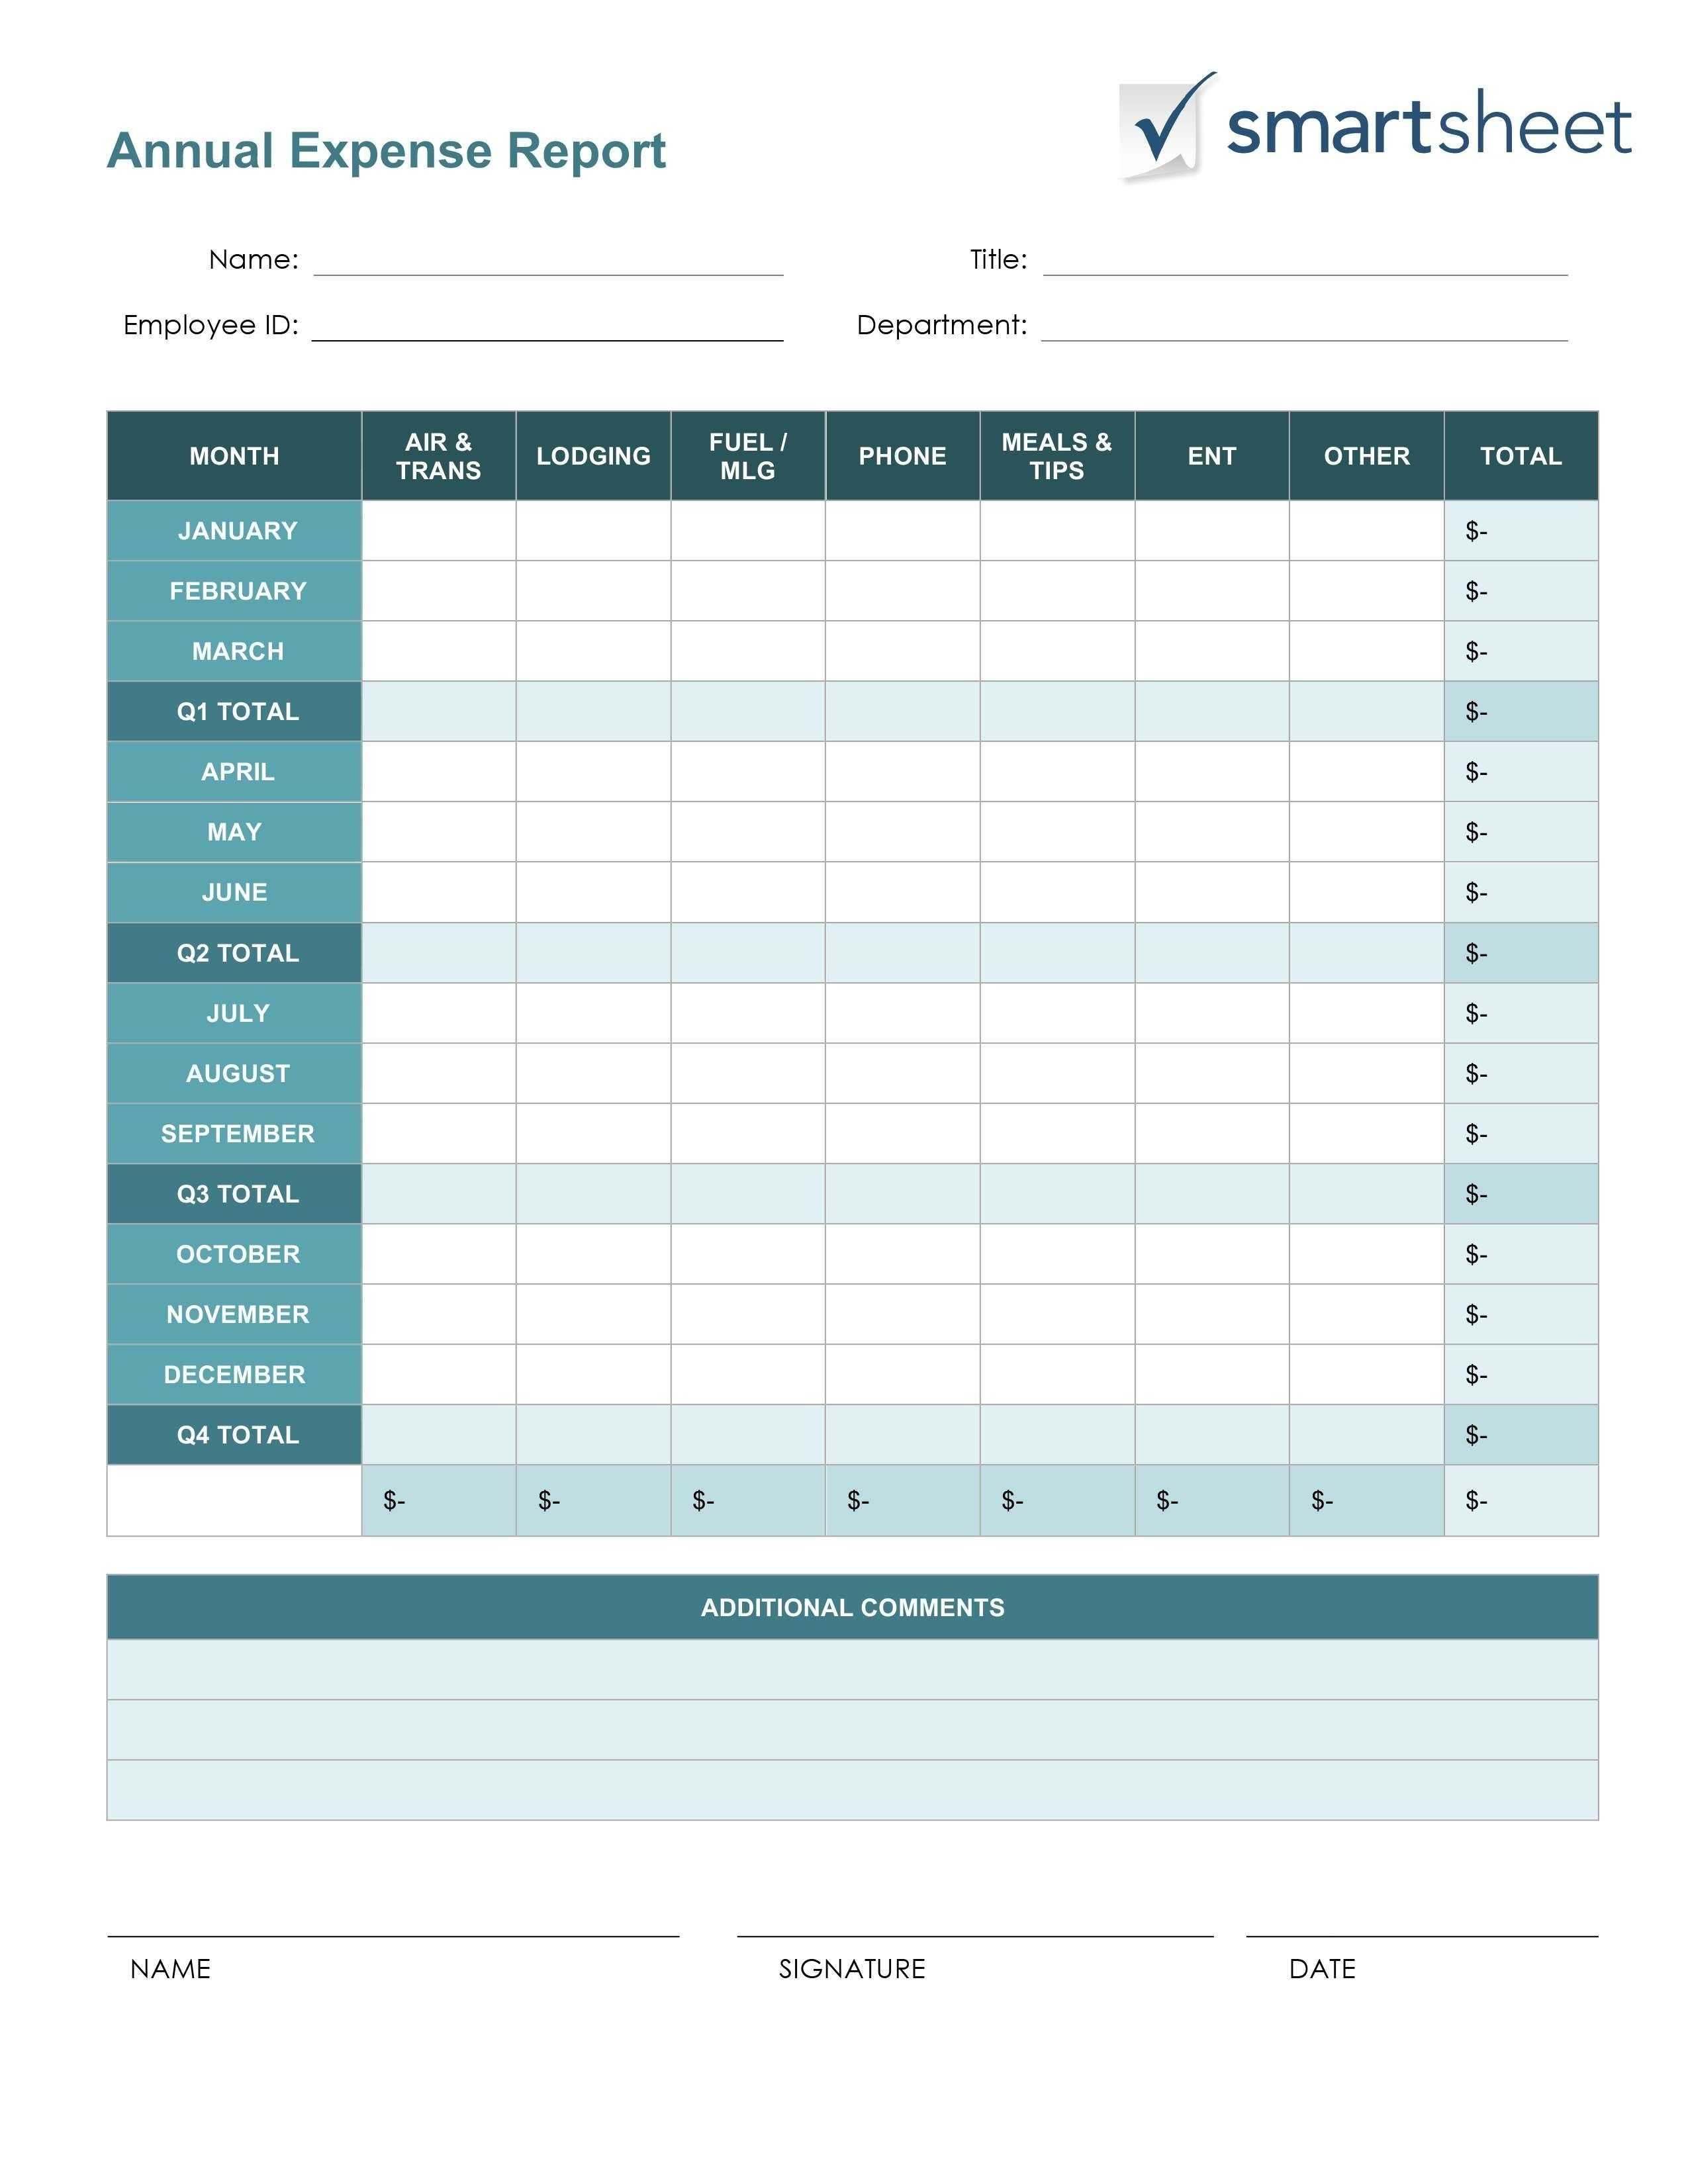 New Expenses Excel #exceltemplate #xls #xlstemplate With Expense Report Spreadsheet Template